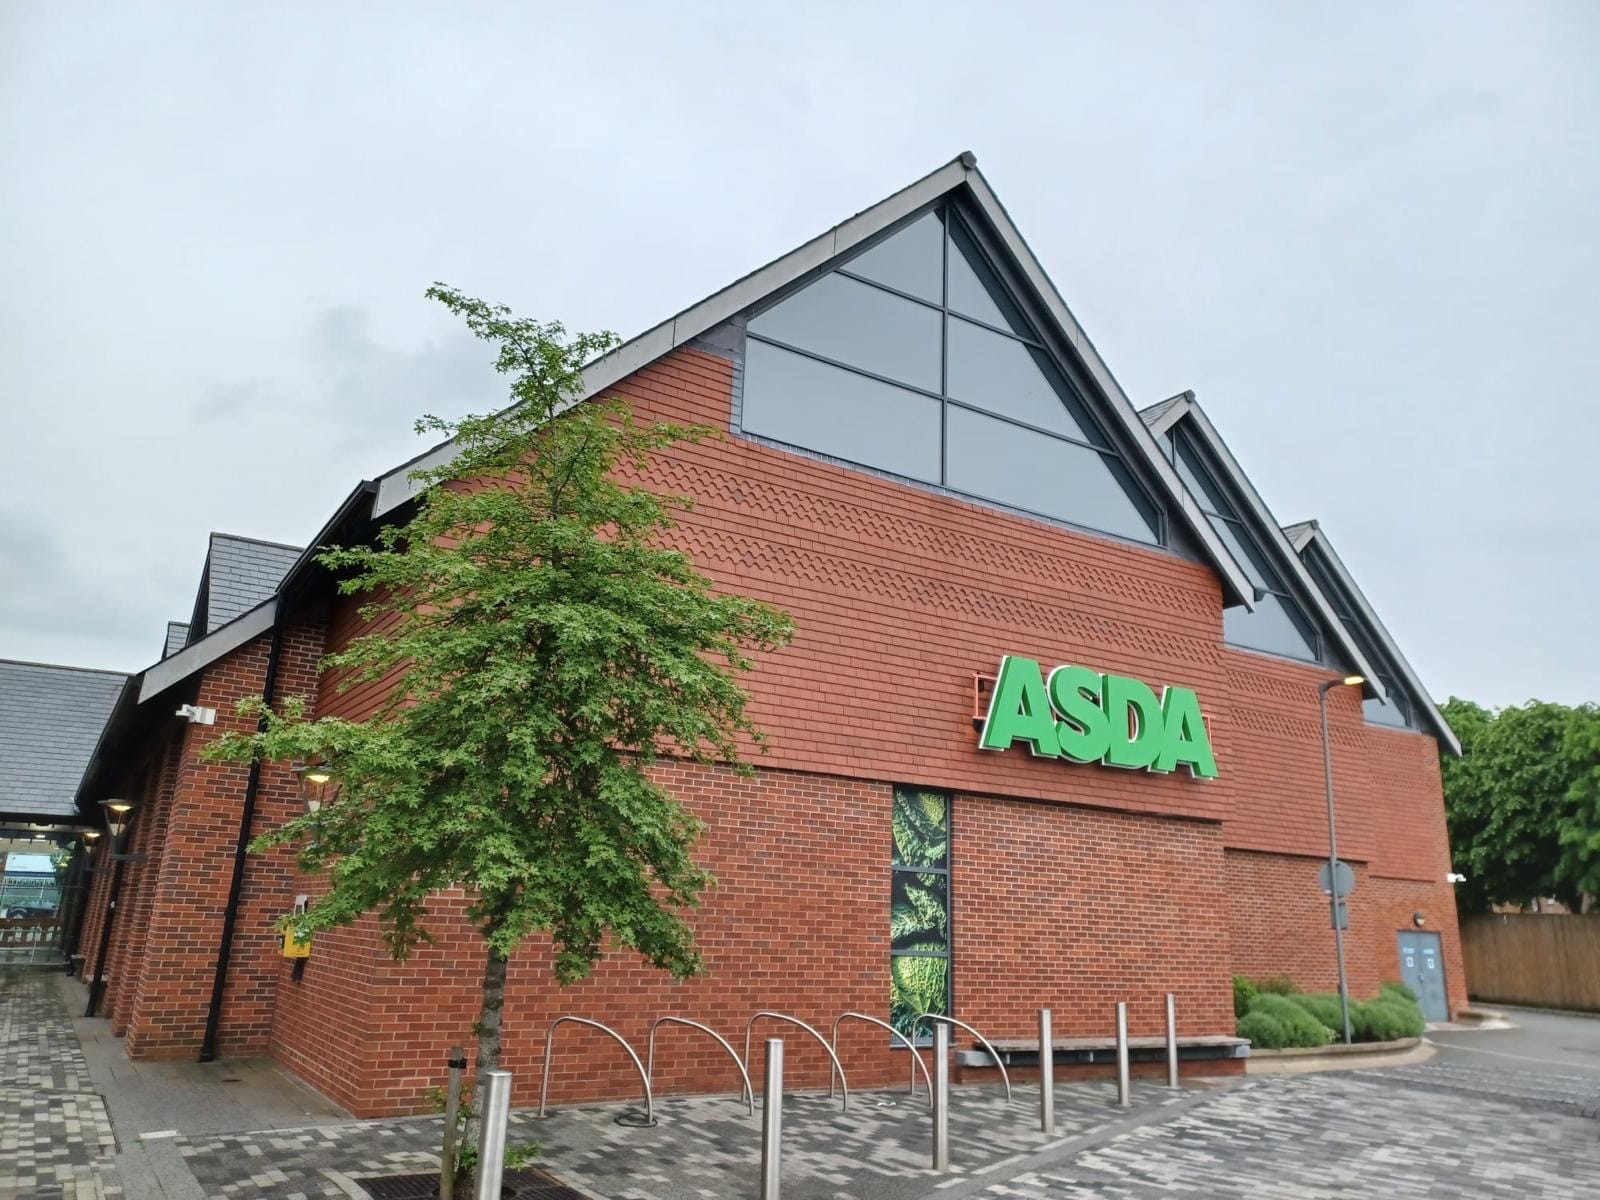 Asda reveals opening date for new Hale Barns store